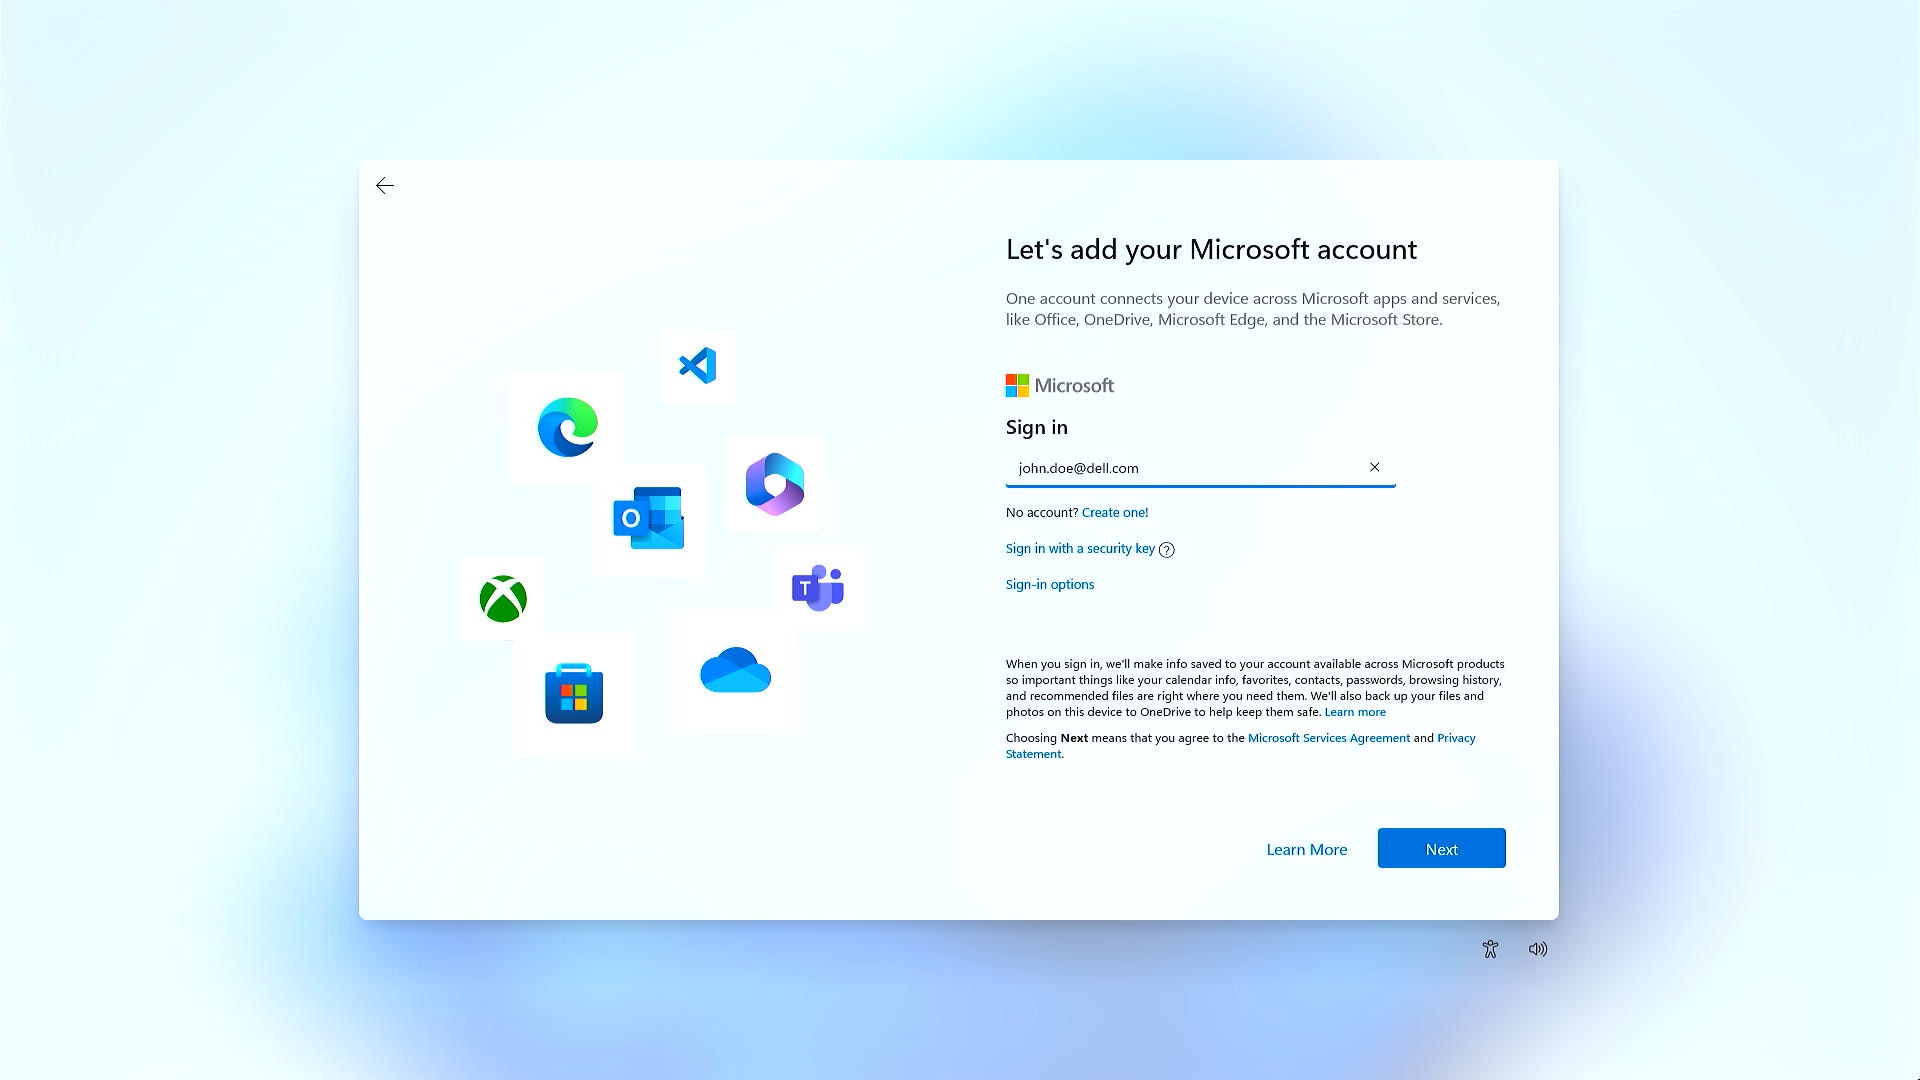 Microsoft account sign in screen during Windows setup